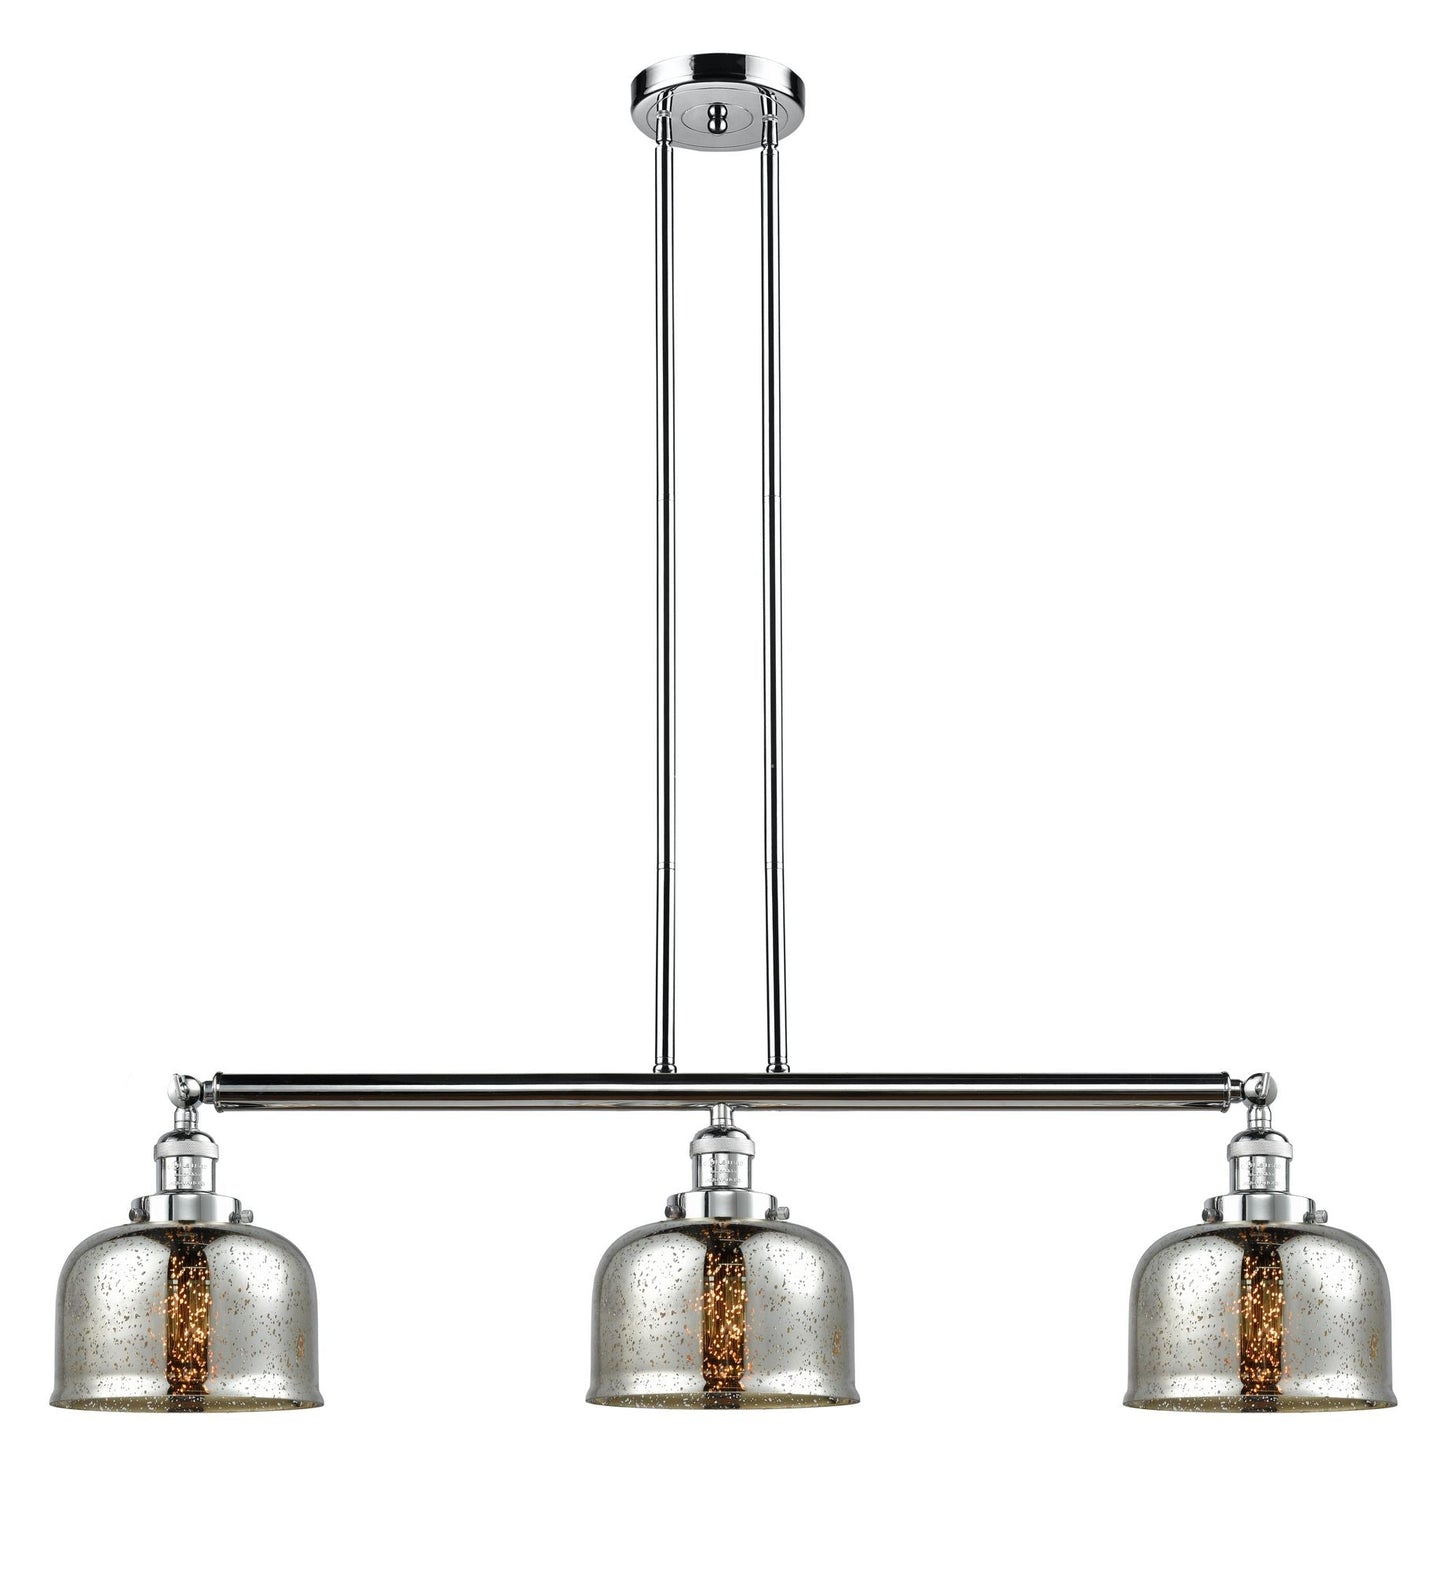 213-PC-G78 3-Light 40.5" Polished Chrome Island Light - Silver Plated Mercury Large Bell Glass - LED Bulb - Dimmensions: 40.5 x 8 x 13<br>Minimum Height : 20<br>Maximum Height : 44 - Sloped Ceiling Compatible: Yes